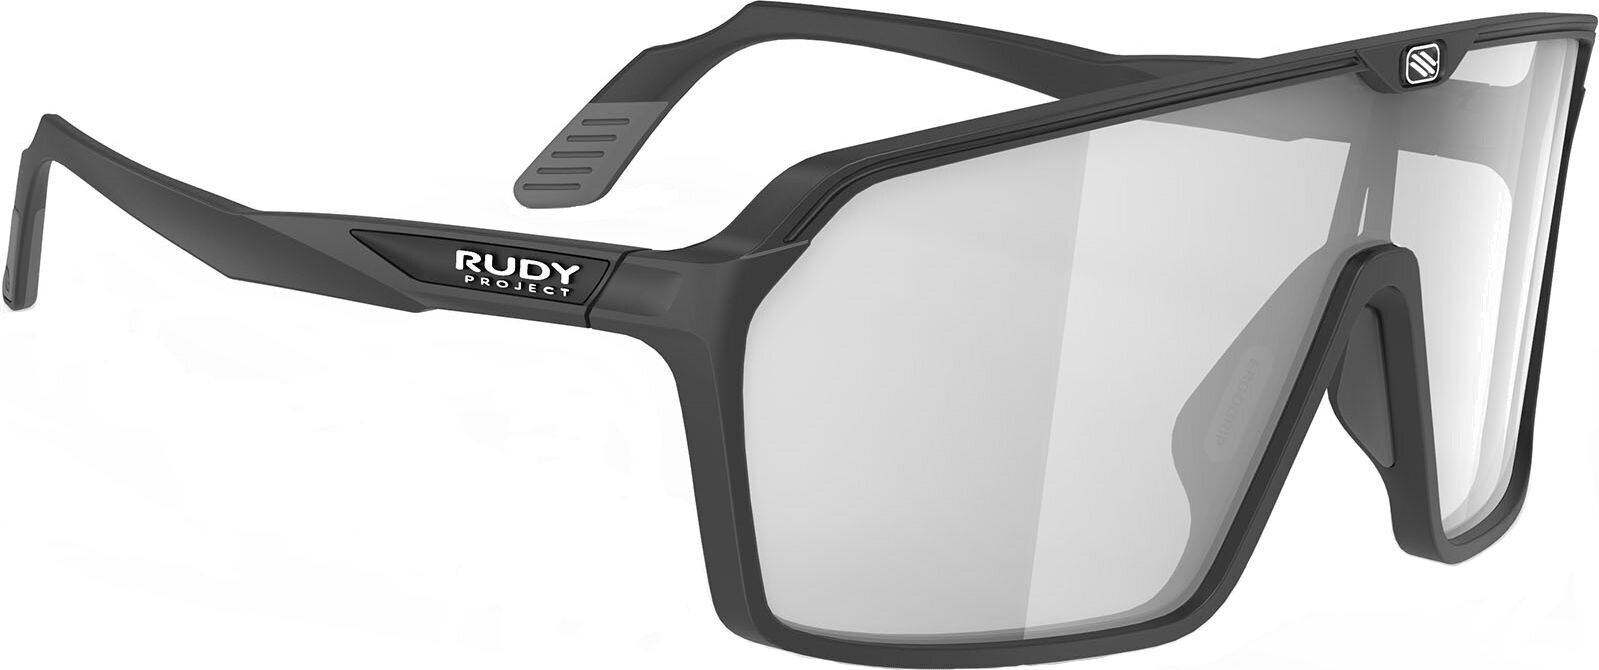 Lifestyle Glasses Rudy Project Spinshield Lifestyle Glasses